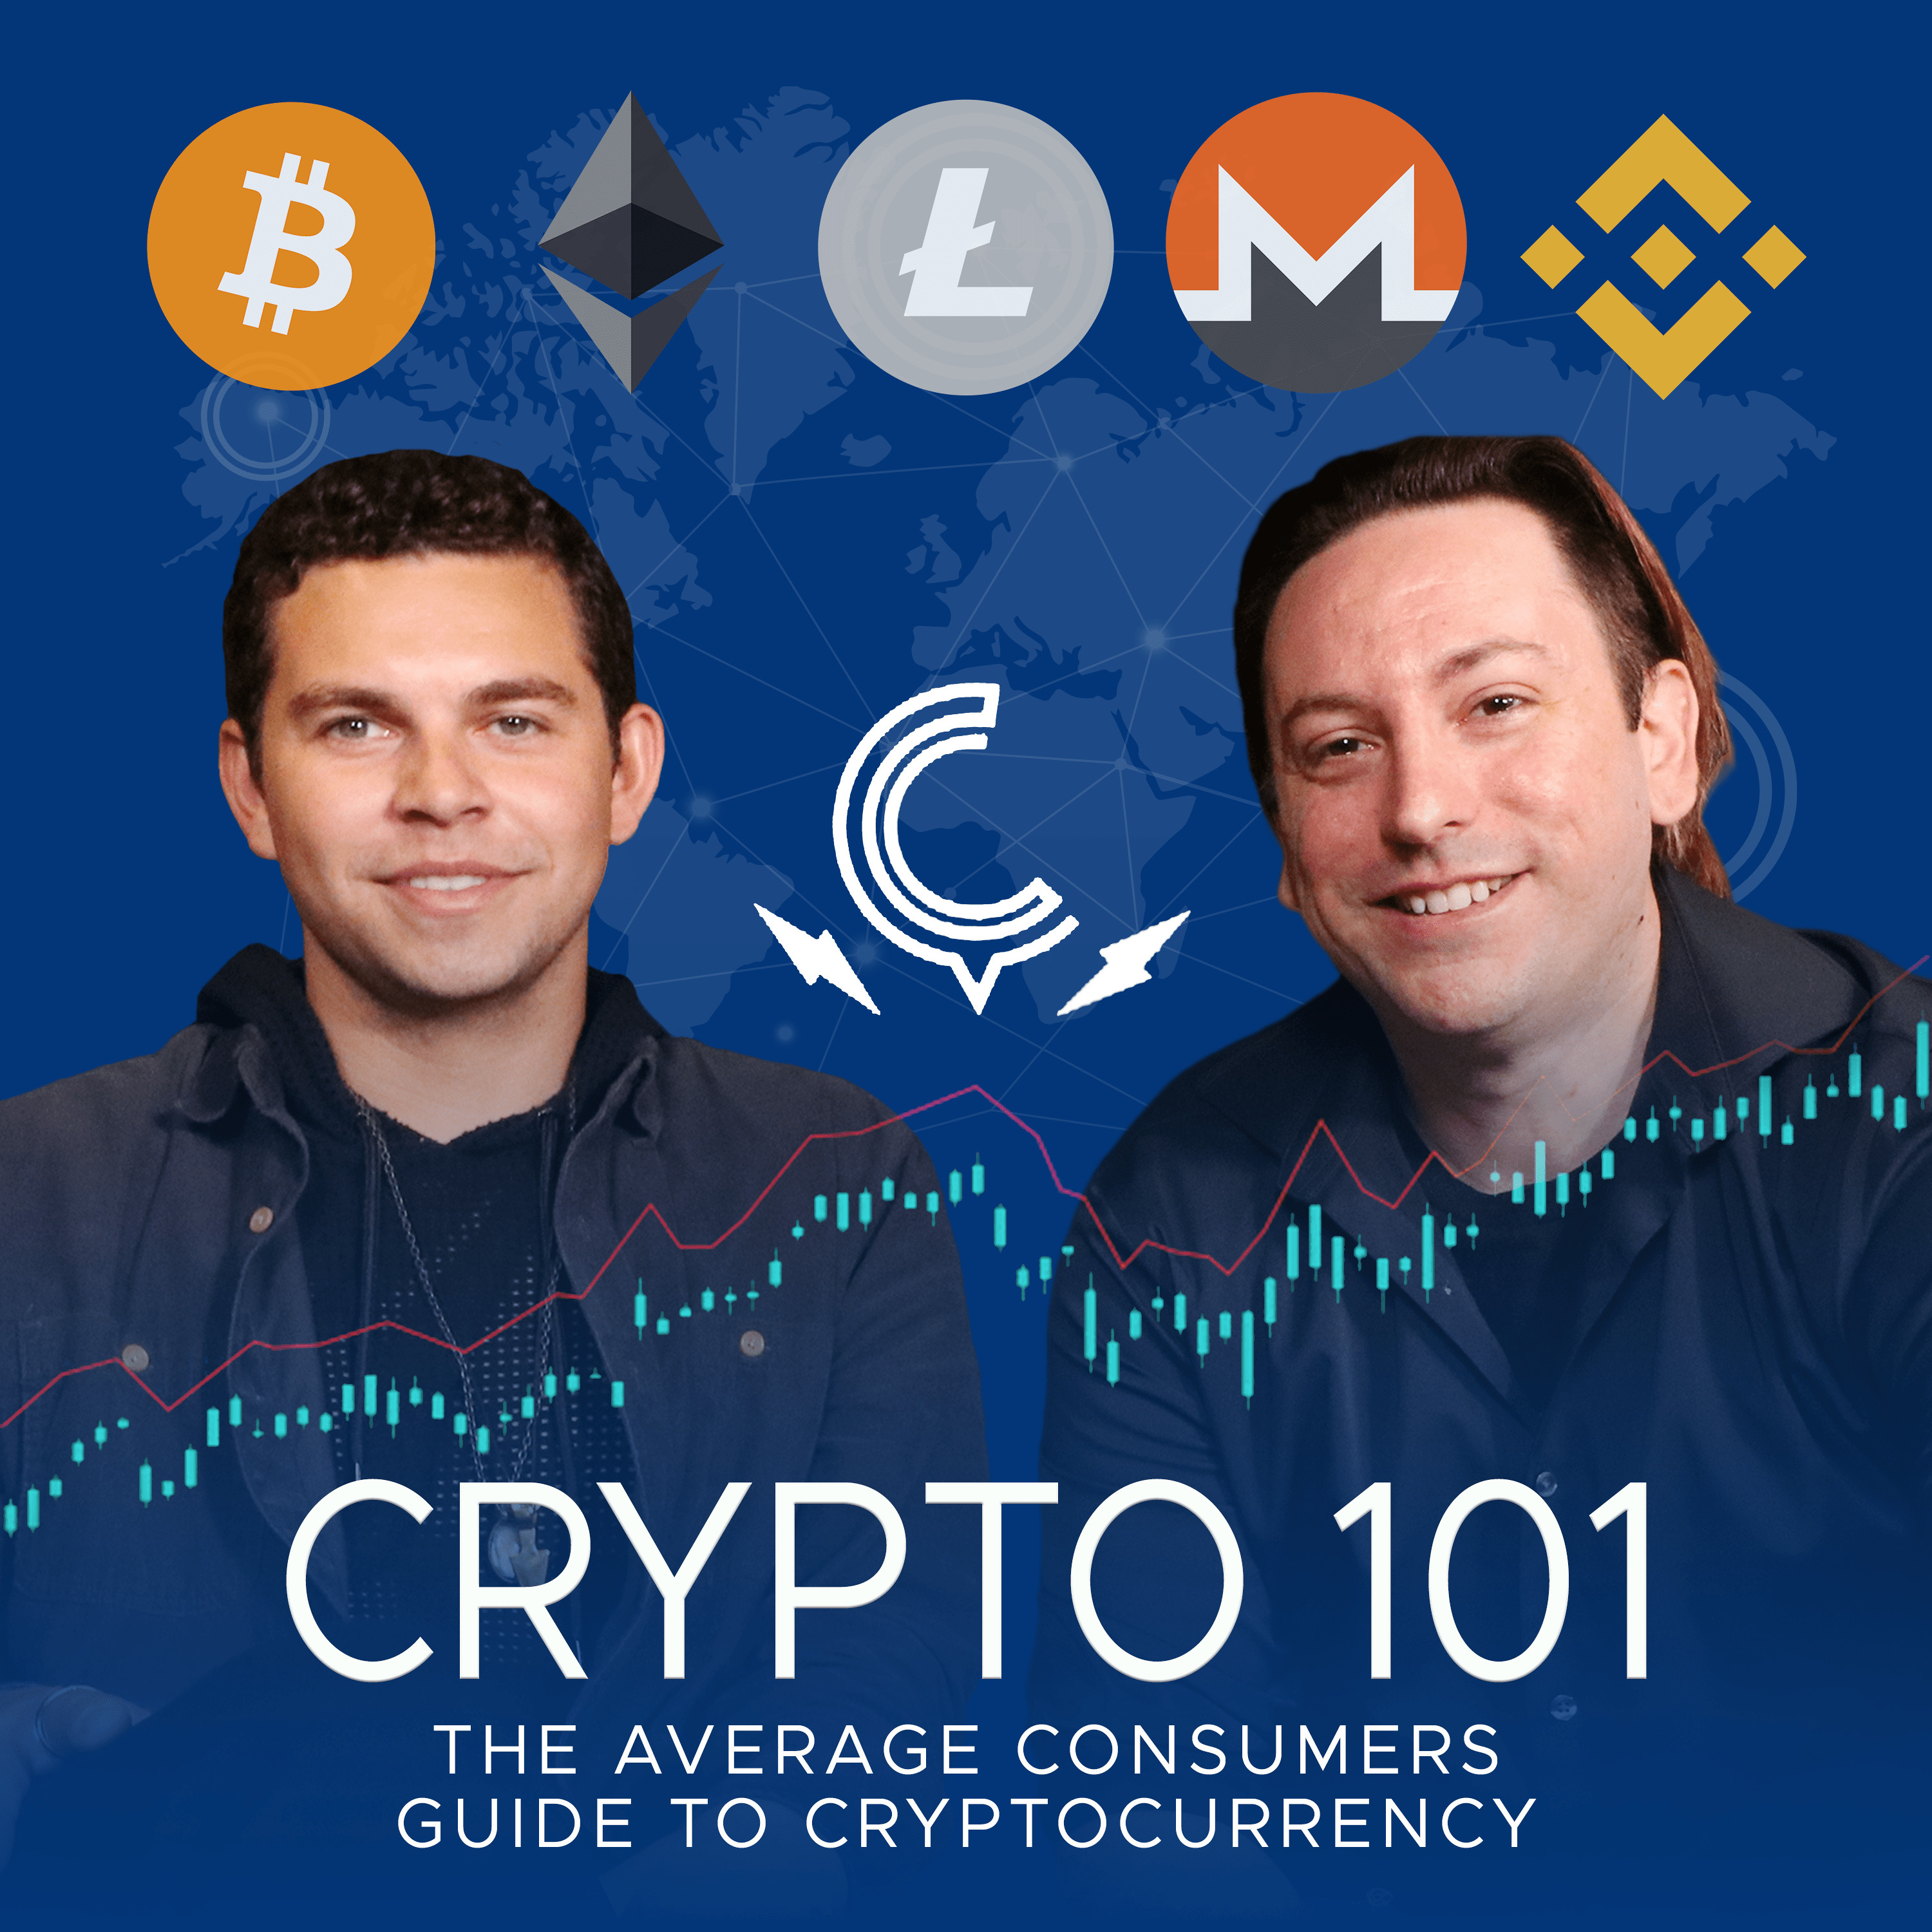 Ep. 182 - What Bitcoin Did’s Peter McCormack